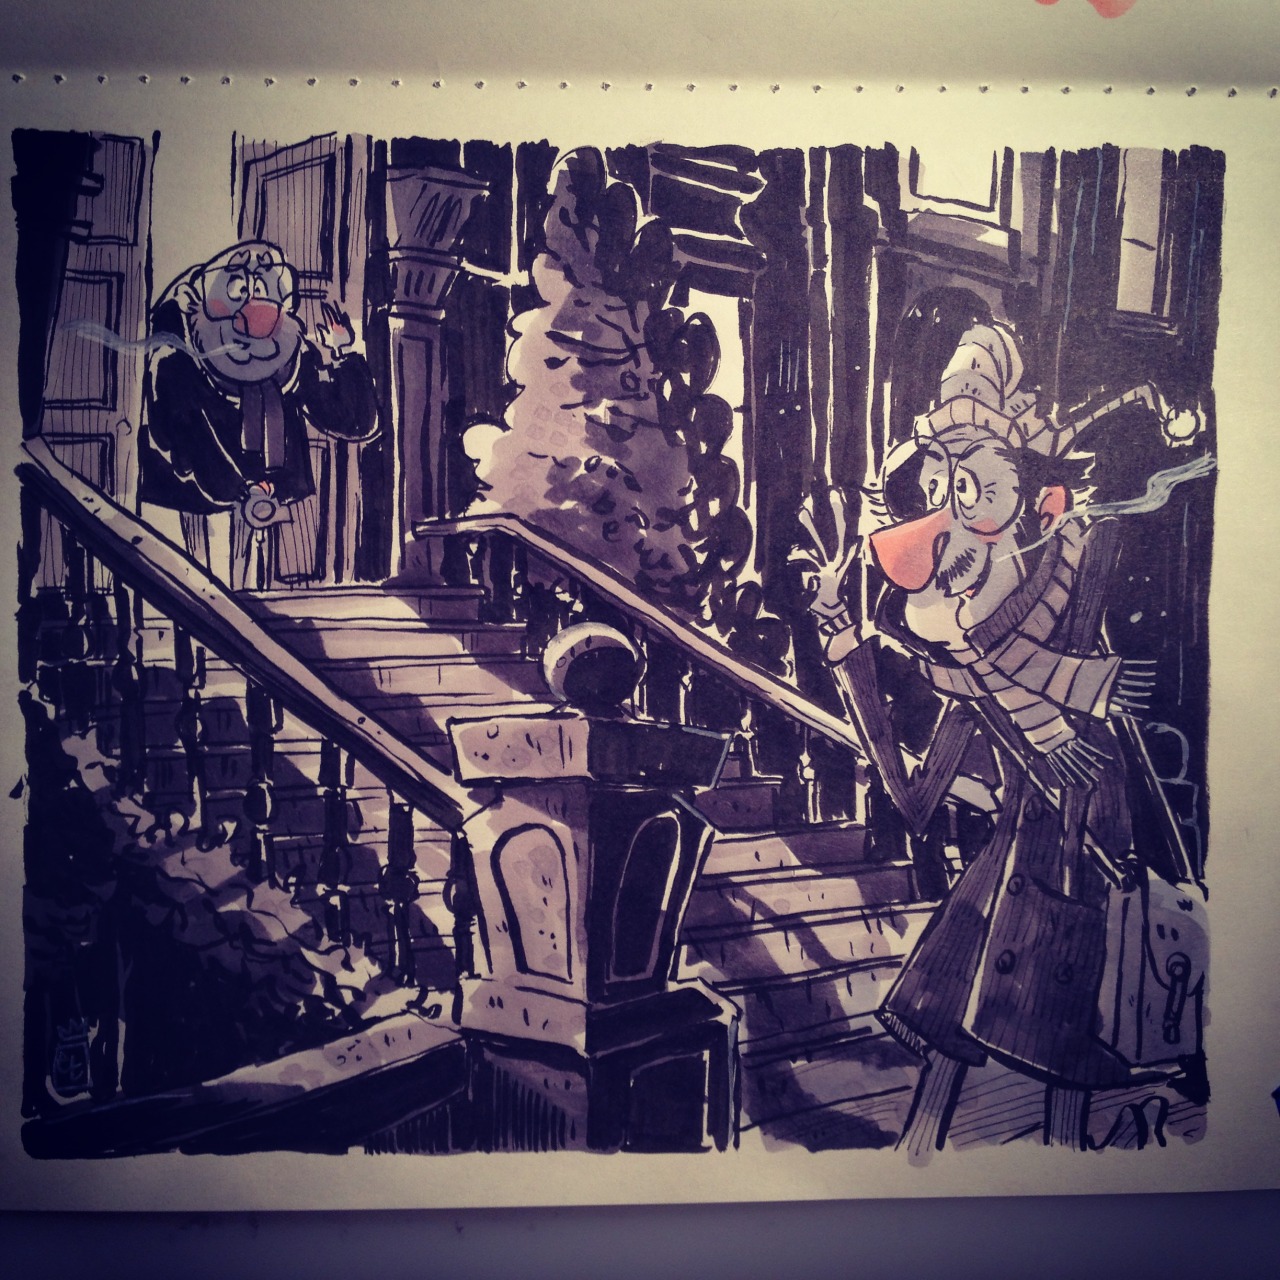 Inktober Day 22: Sam Lewis spent the evening playing chess at his friends house. It was about midnight when they finished their game, then he started home. Outside it was icy cold and quiet as the grave. -Alvin Schwartz